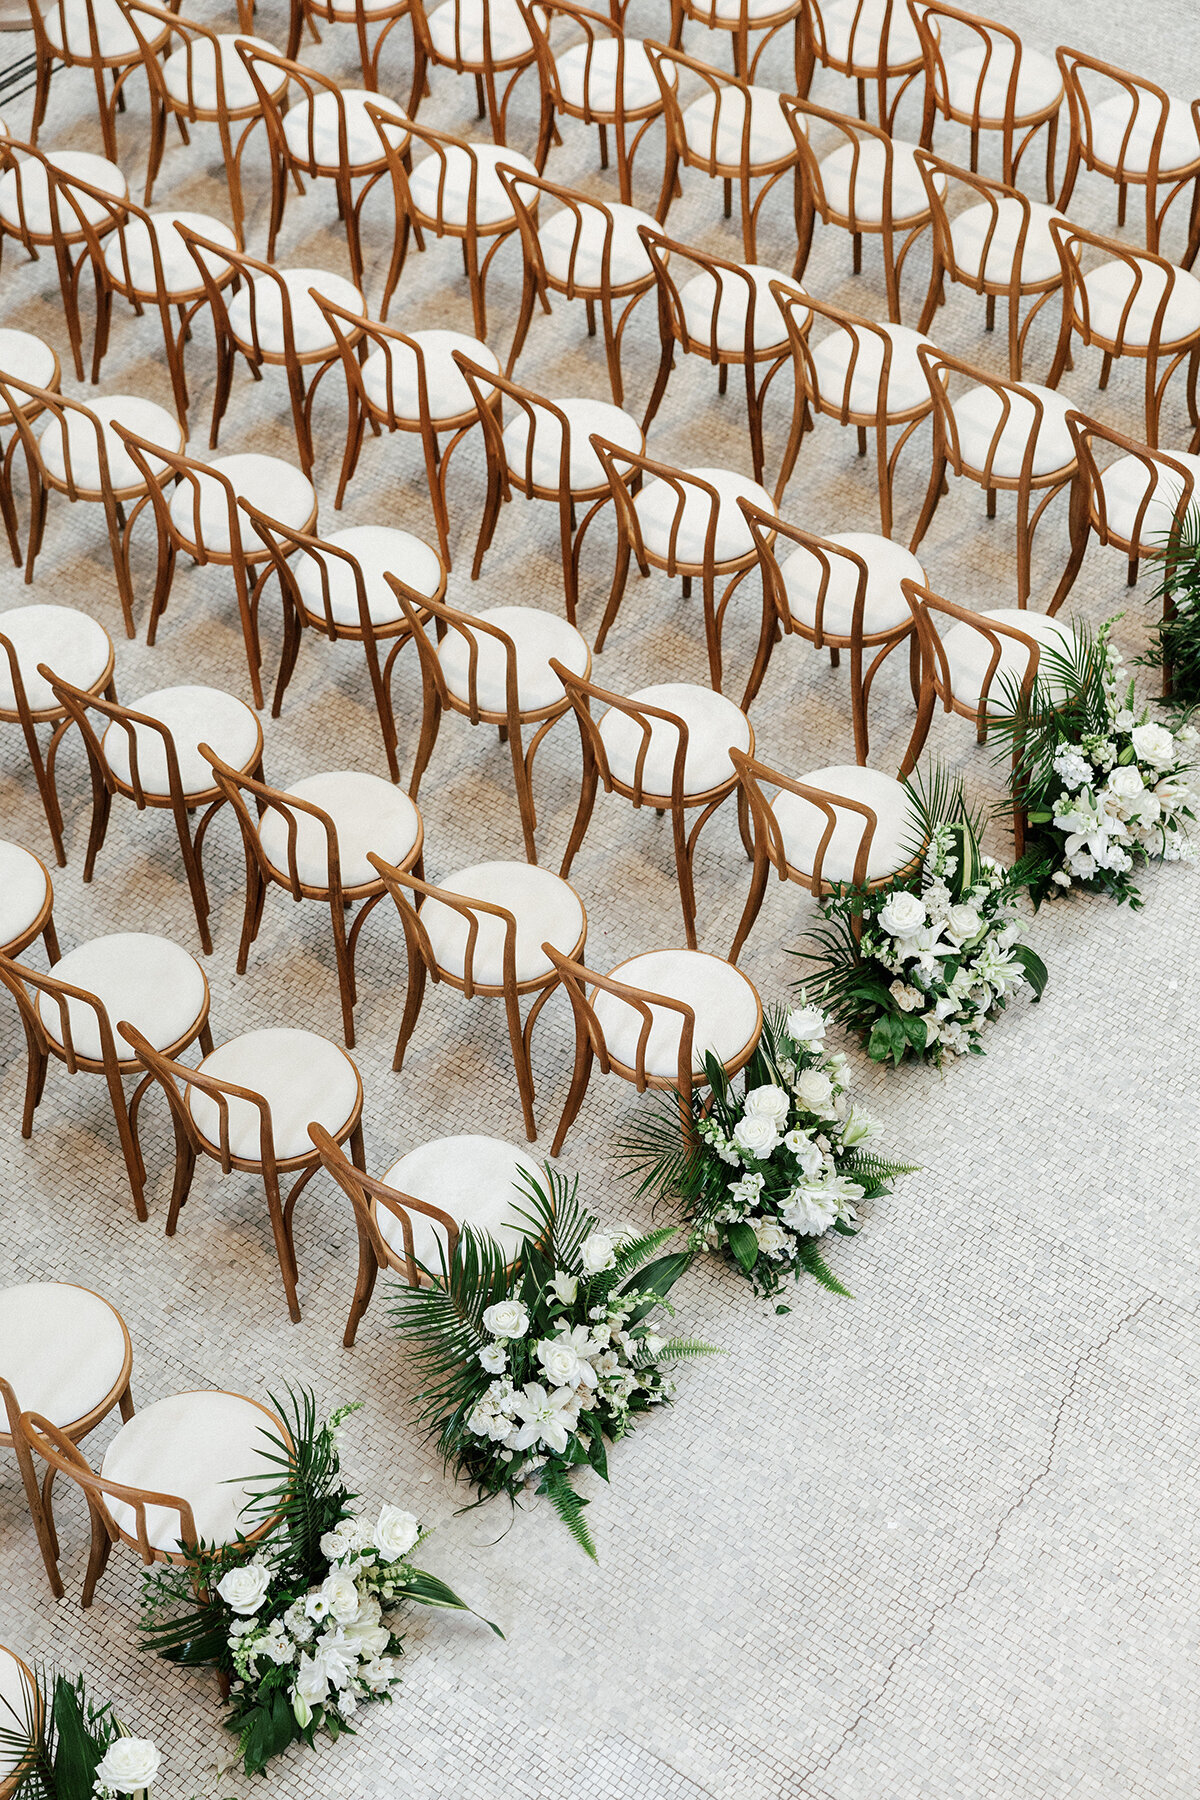 Sumner + Scott - New Orleans Museum of Art Wedding - Luxury Event Planning by Michelle Norwood - 9